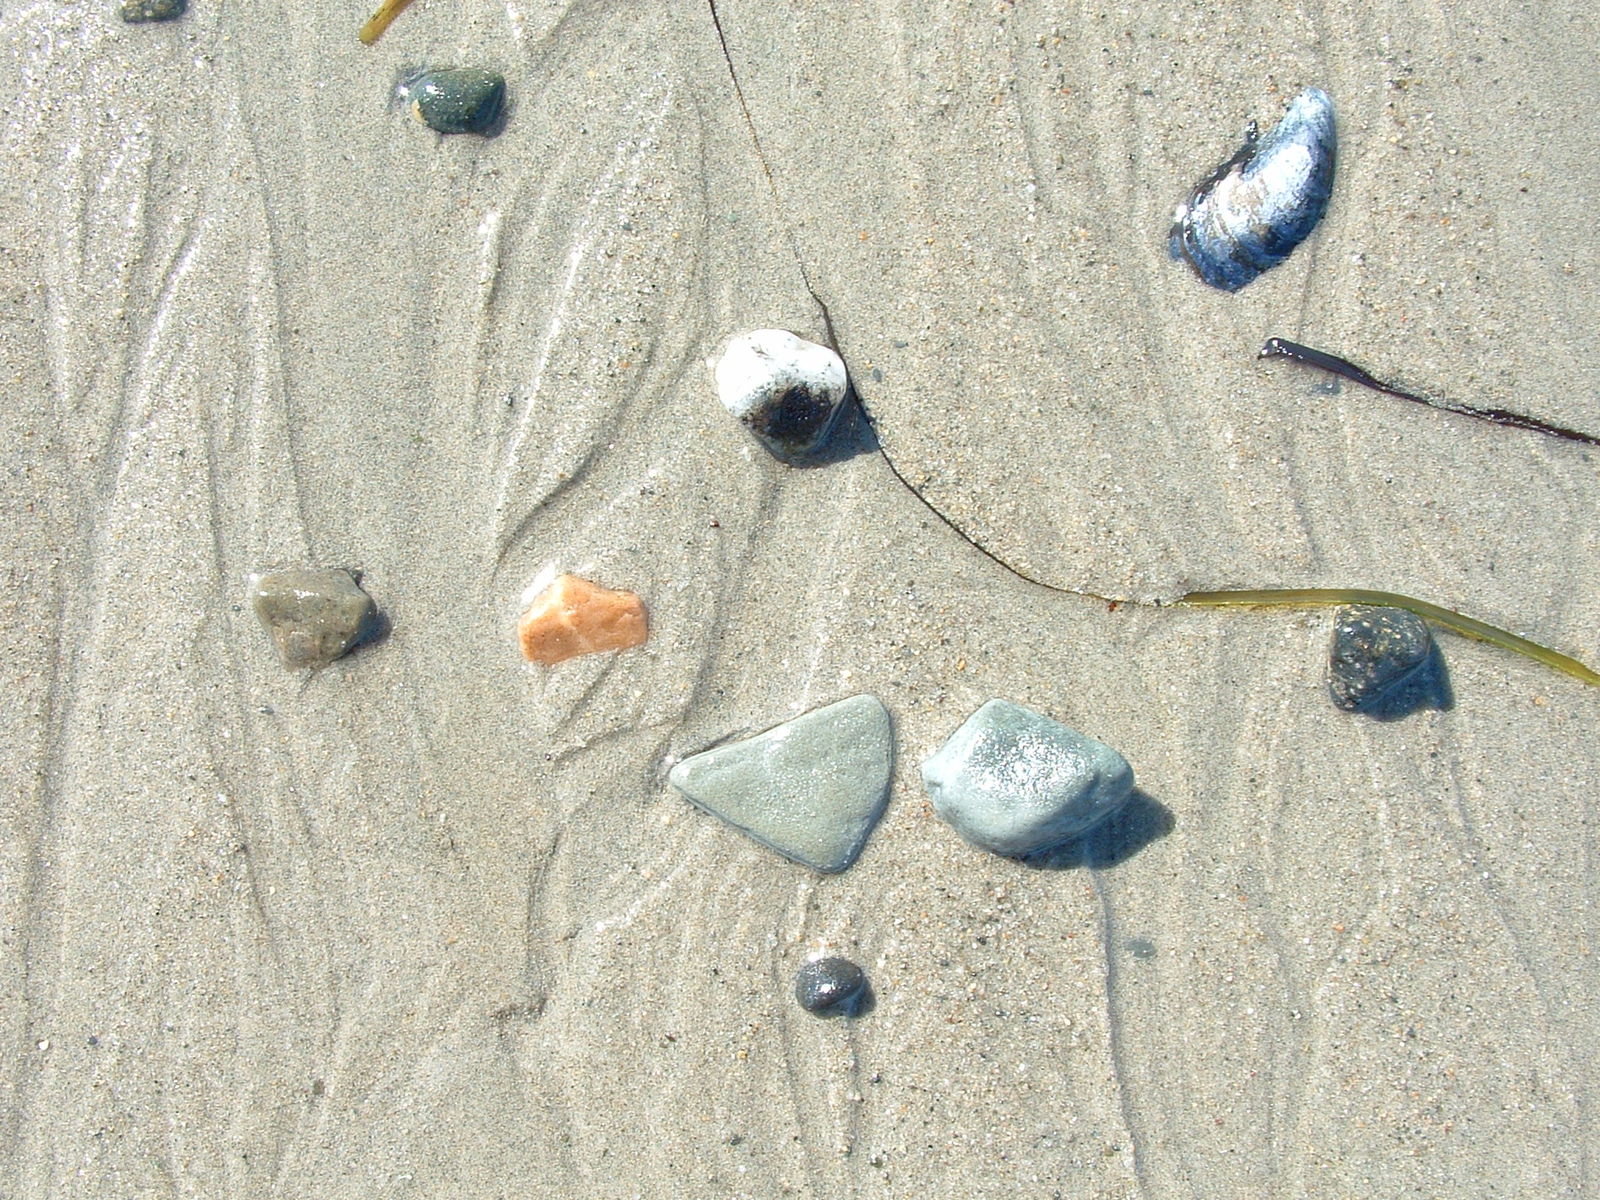 some small shells and plants in the sand